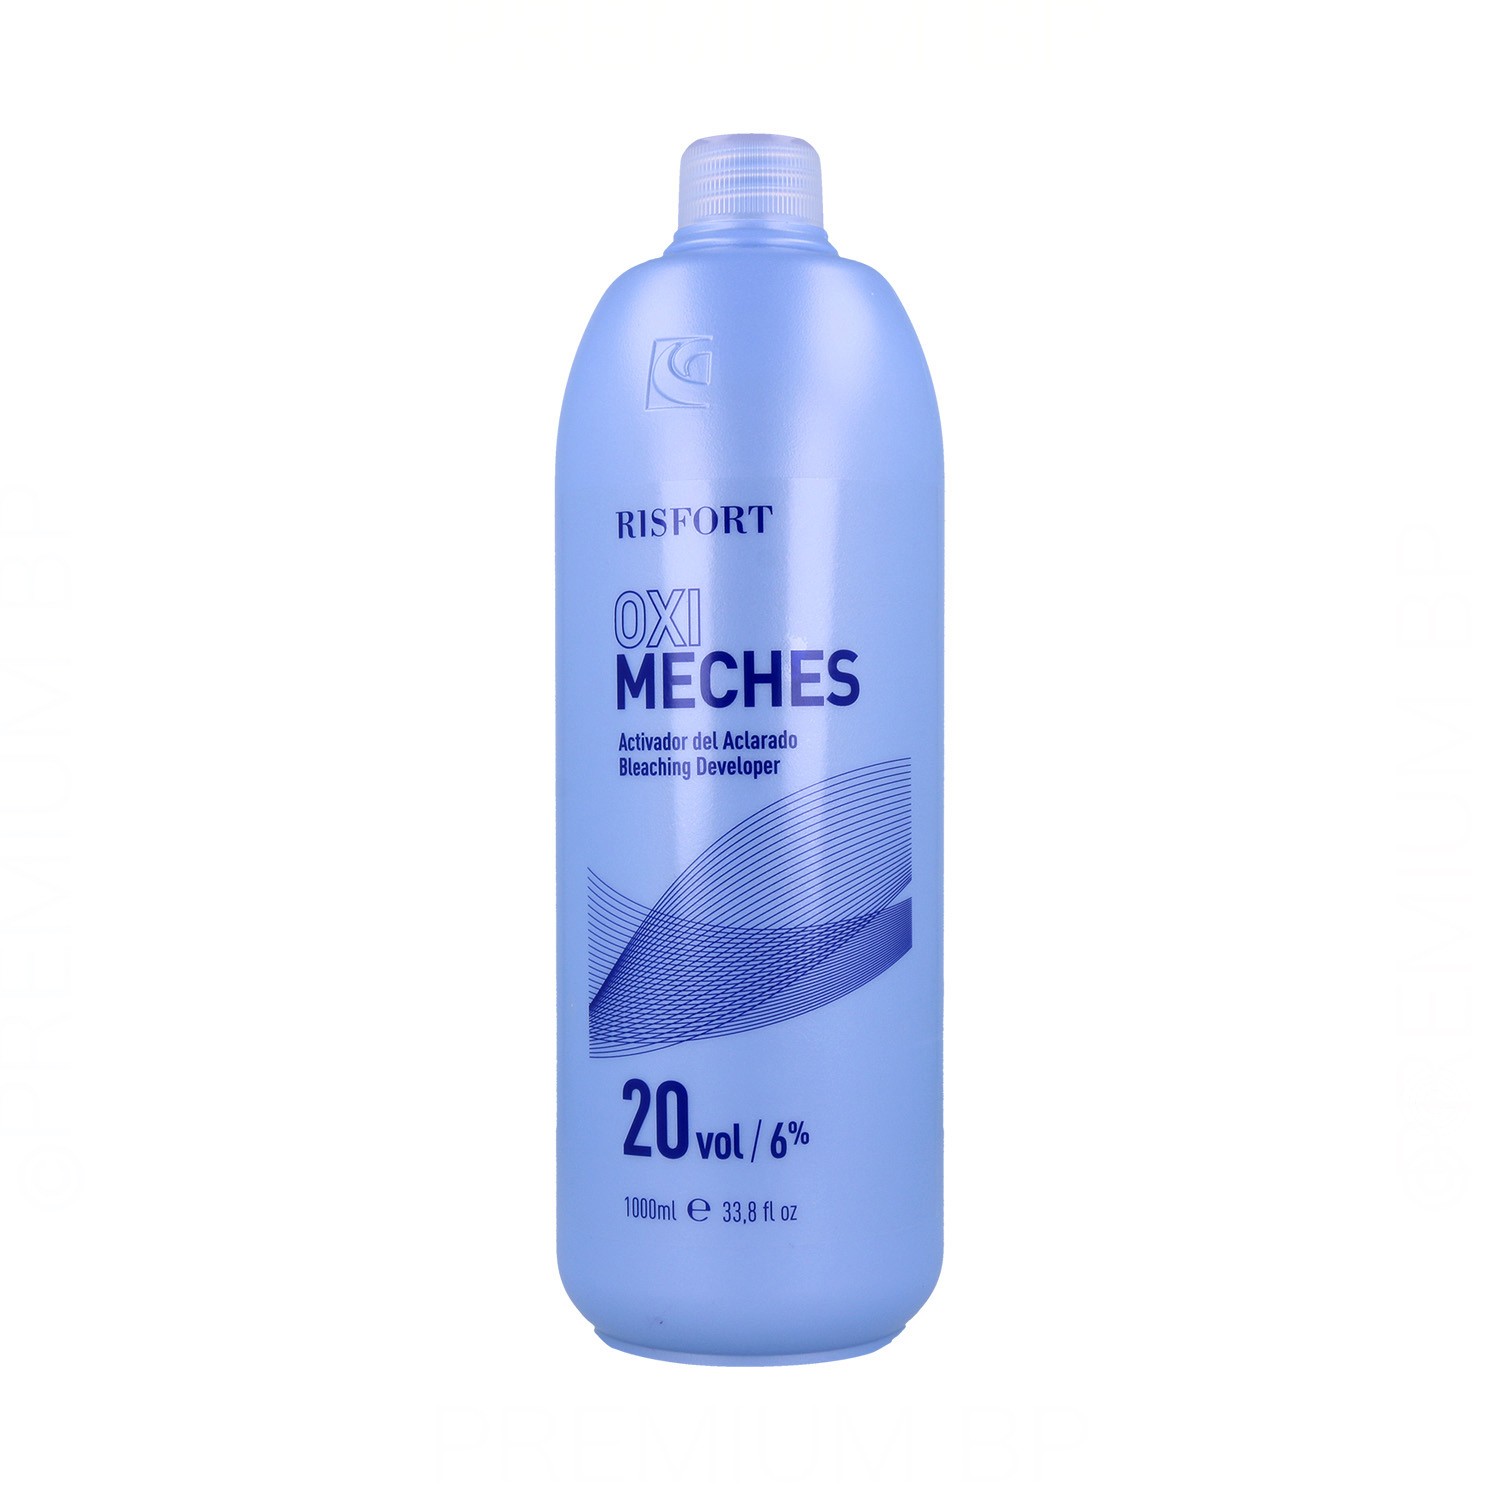 Risfort Oxydant Meches Act 20Vol (6%) 1000 ml